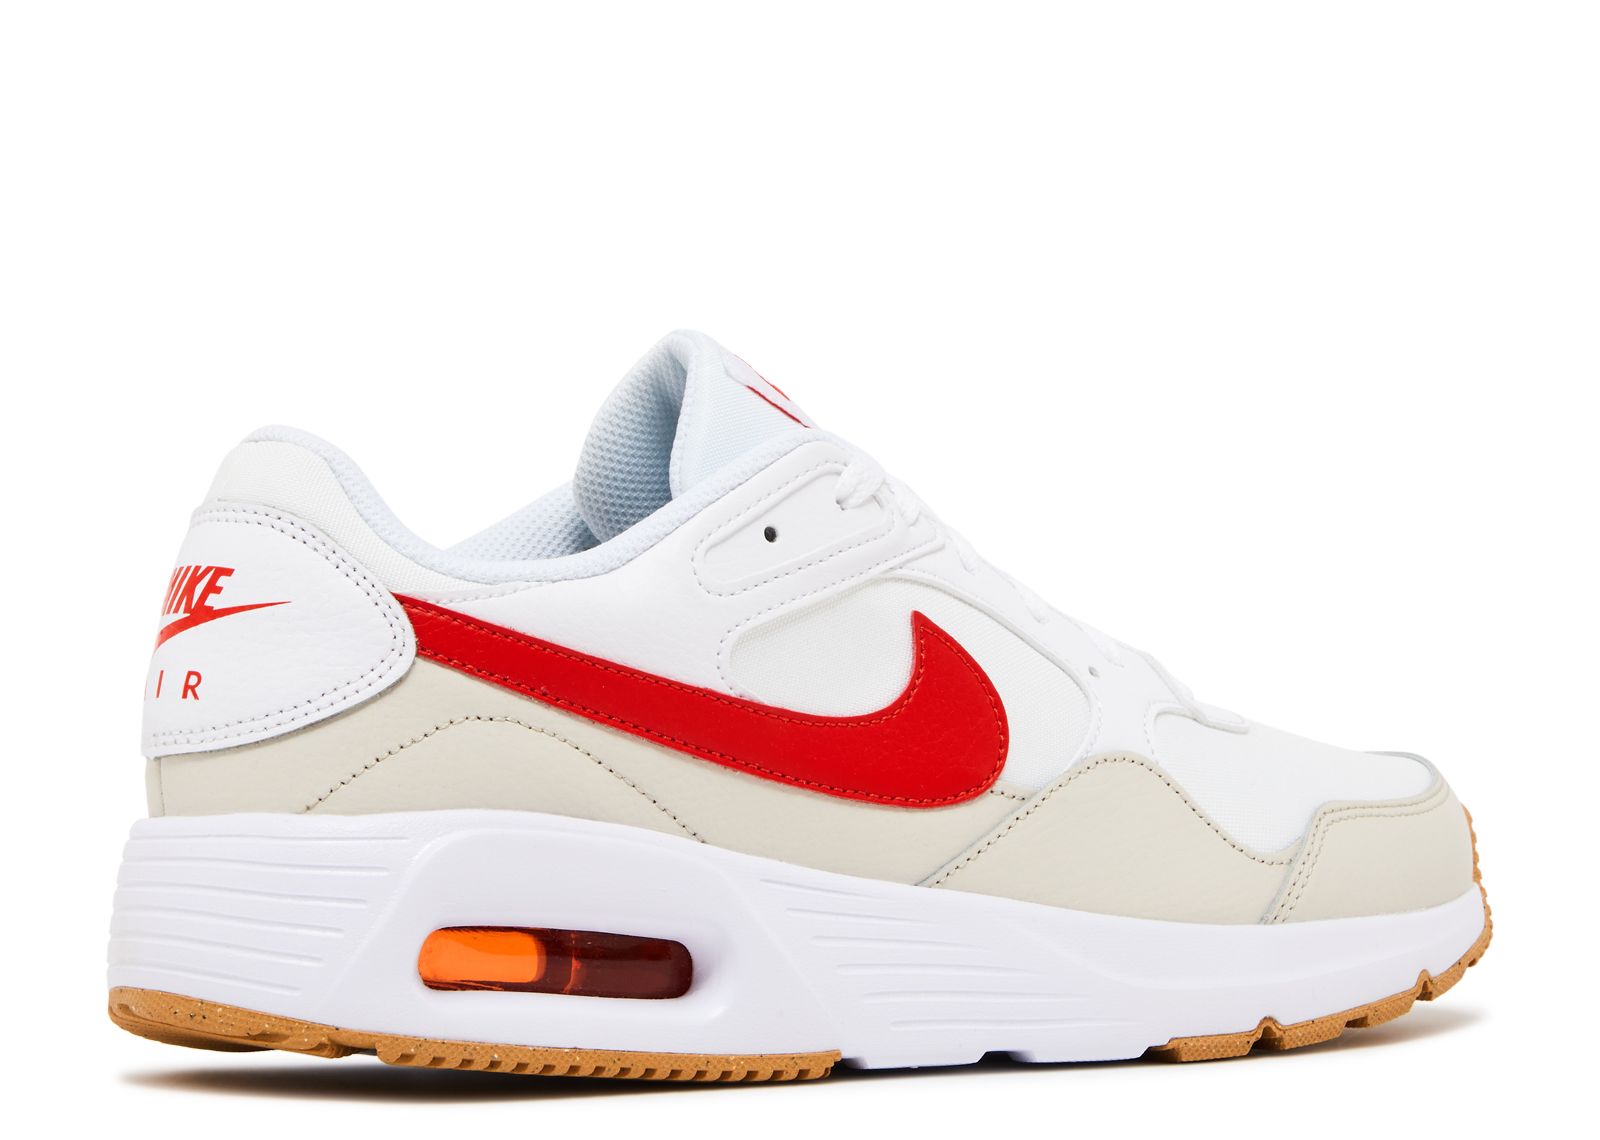 Air Max SC \'White Picante Red\' - Nike - CW4555 112 - white/light orewood  brown/gum light brown/picante red | Flight Club